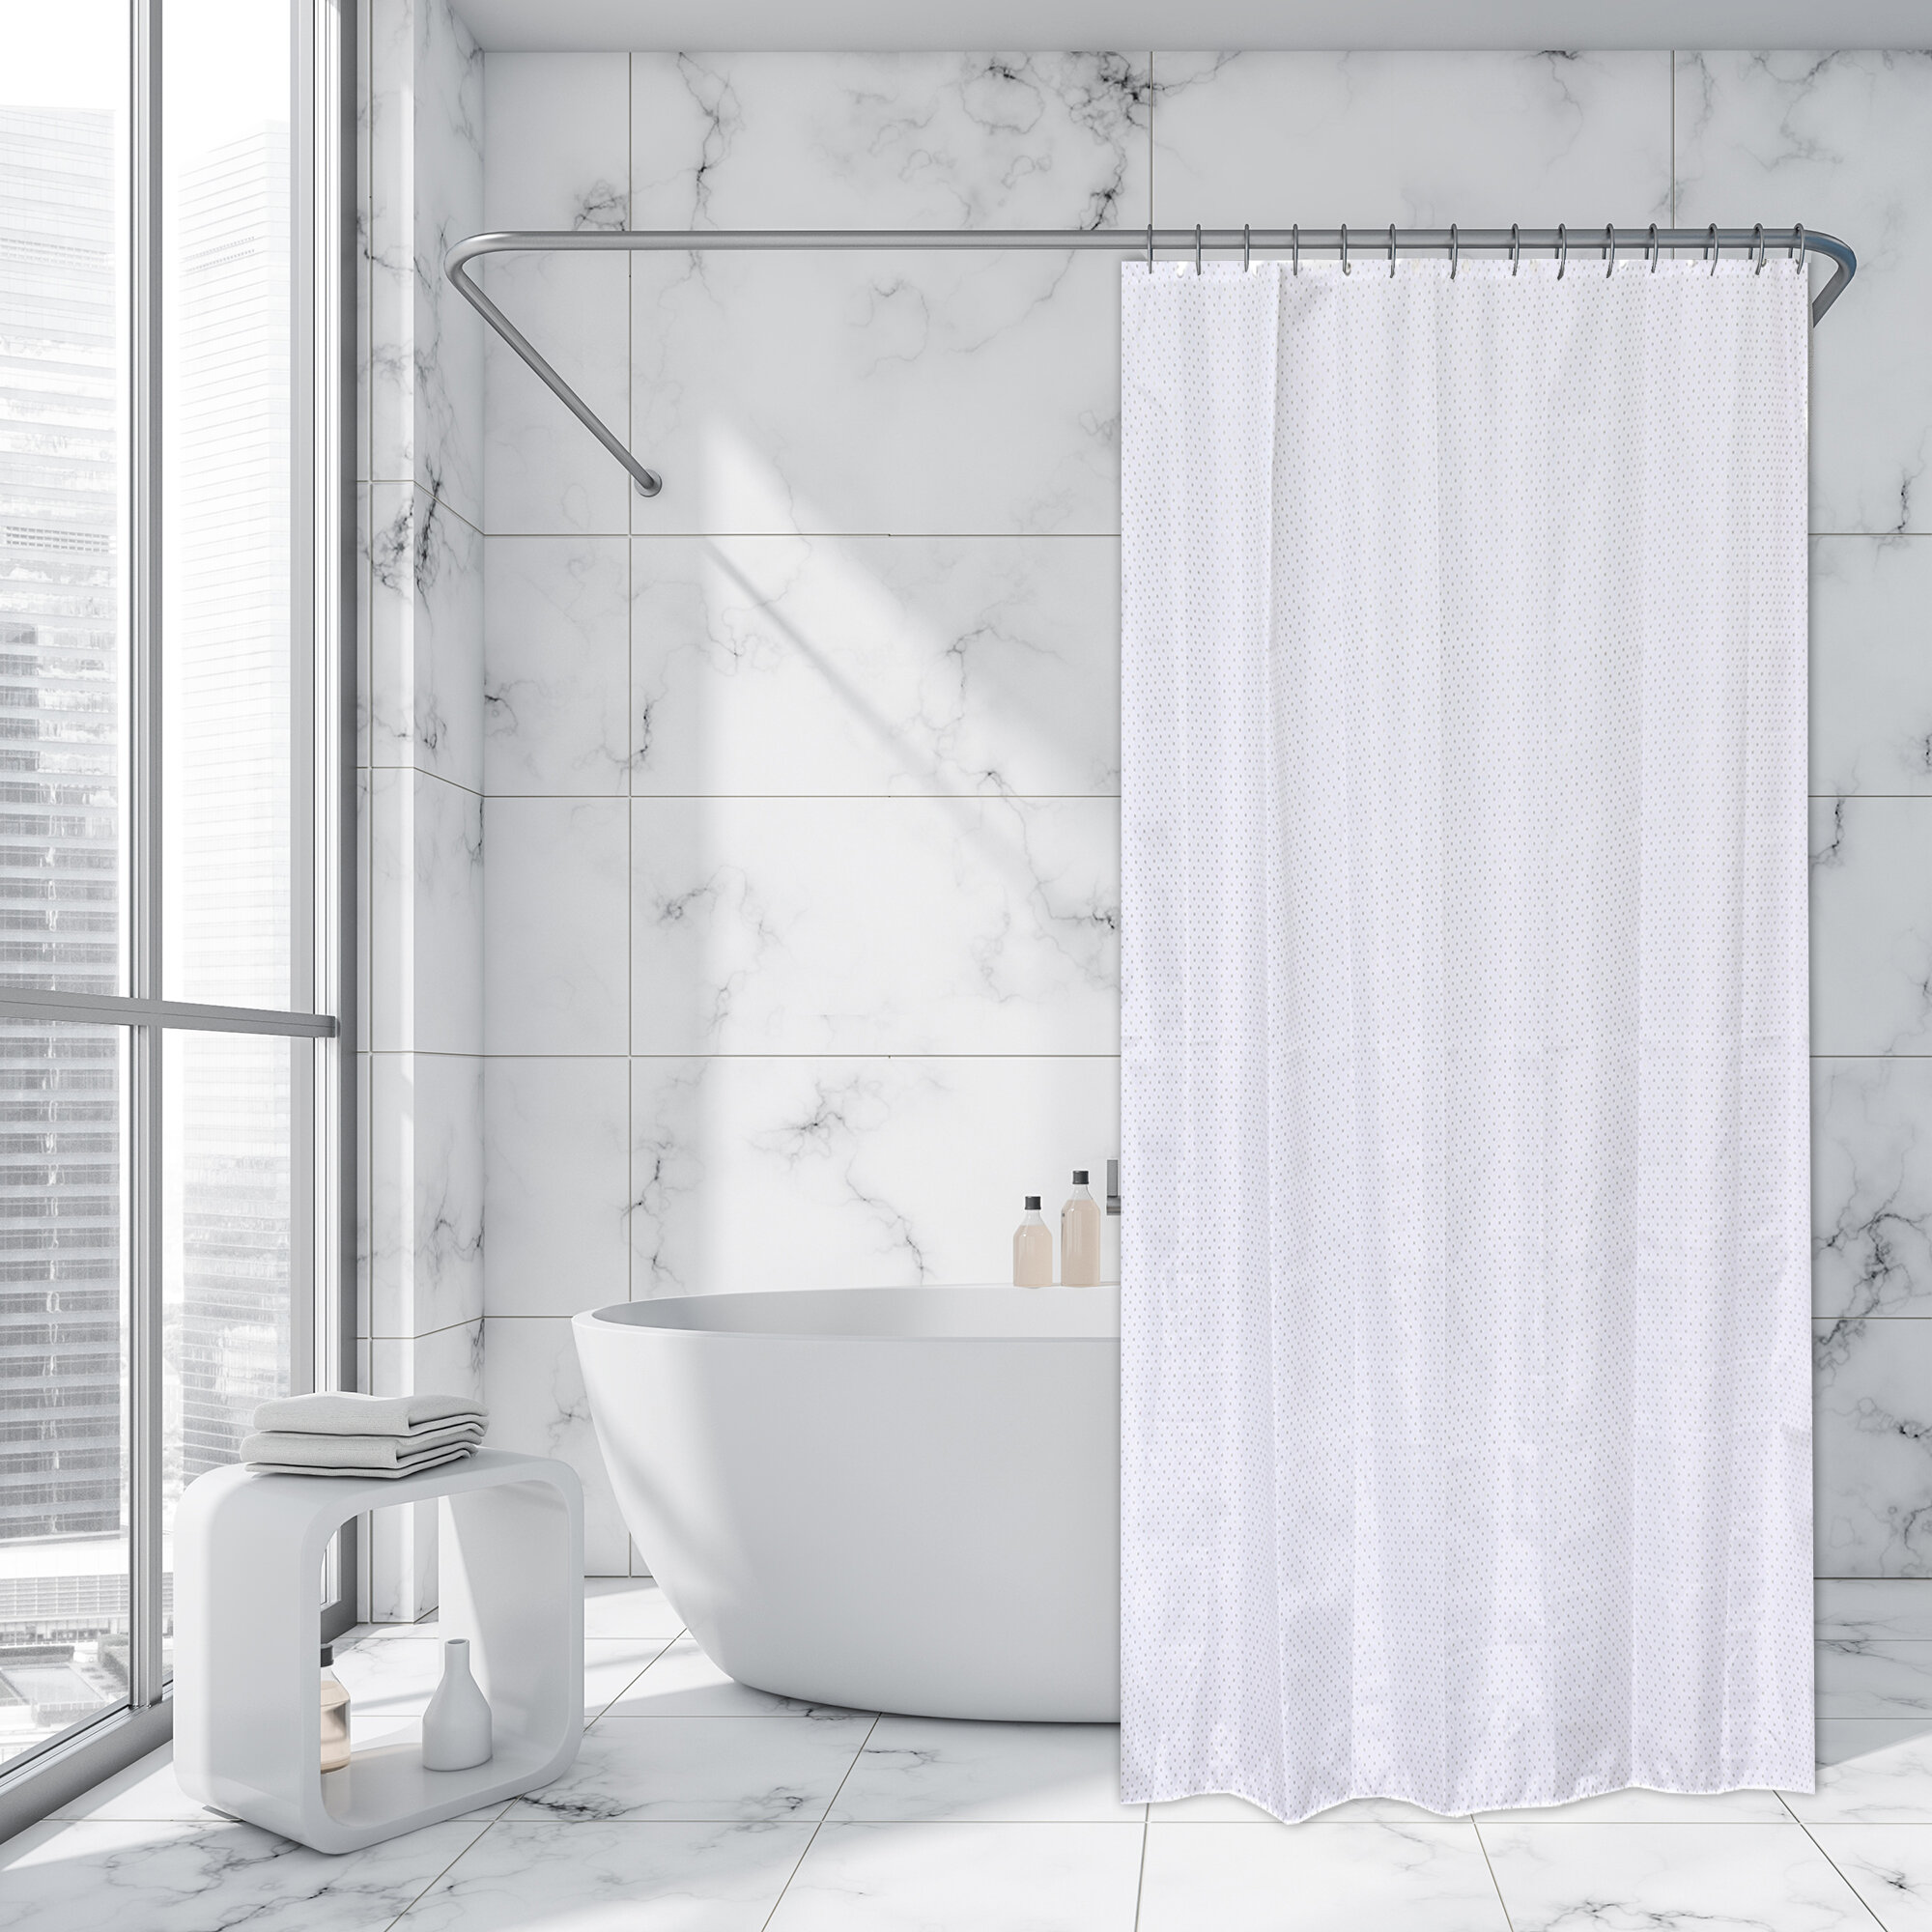 Shower curtain 180 x 200 cm suitable for all shower selection incl rings 